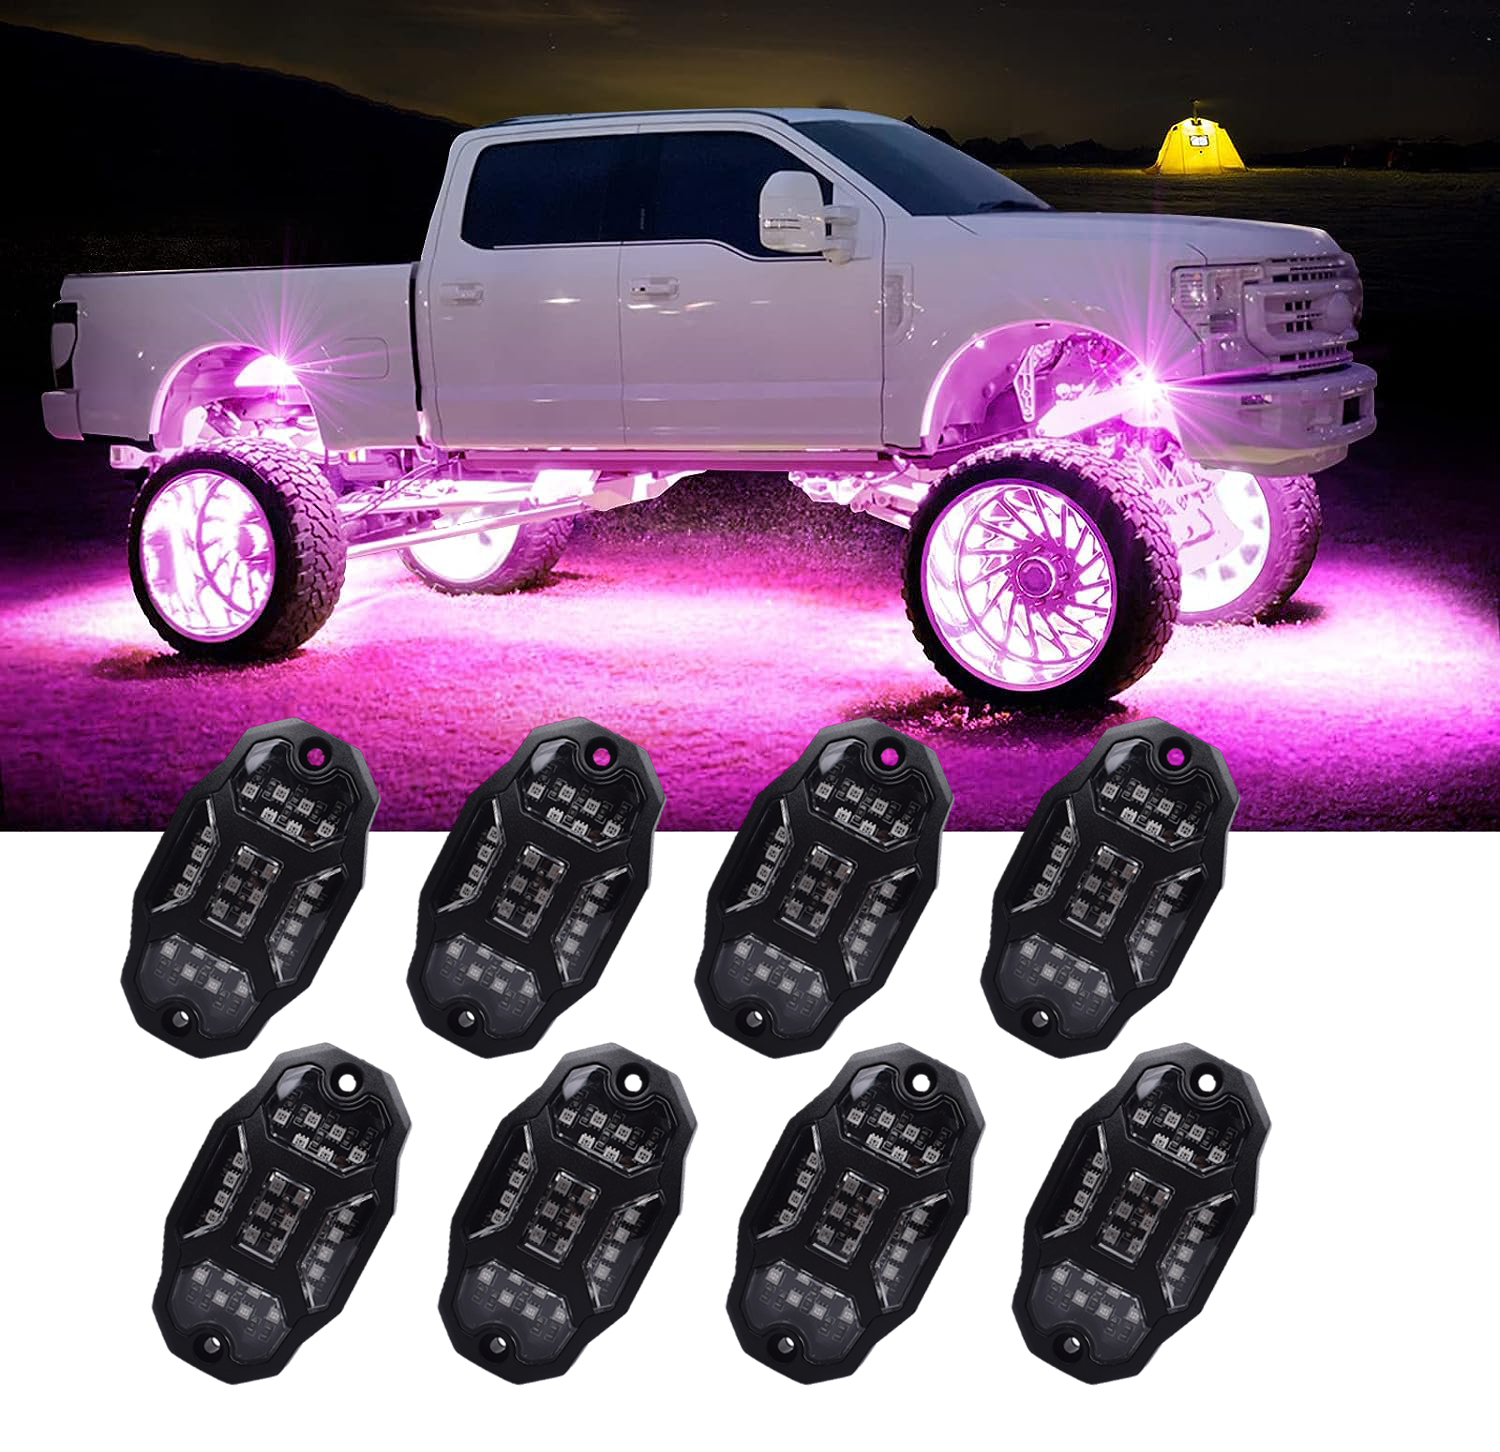 Undergolw Light For Car Jeep Off-Road Truck Boat Bluetooth APP Control 4/6/8 In 1 RGB LED Rock Lights Chassis Light Music Sync - COPY - bav4w2